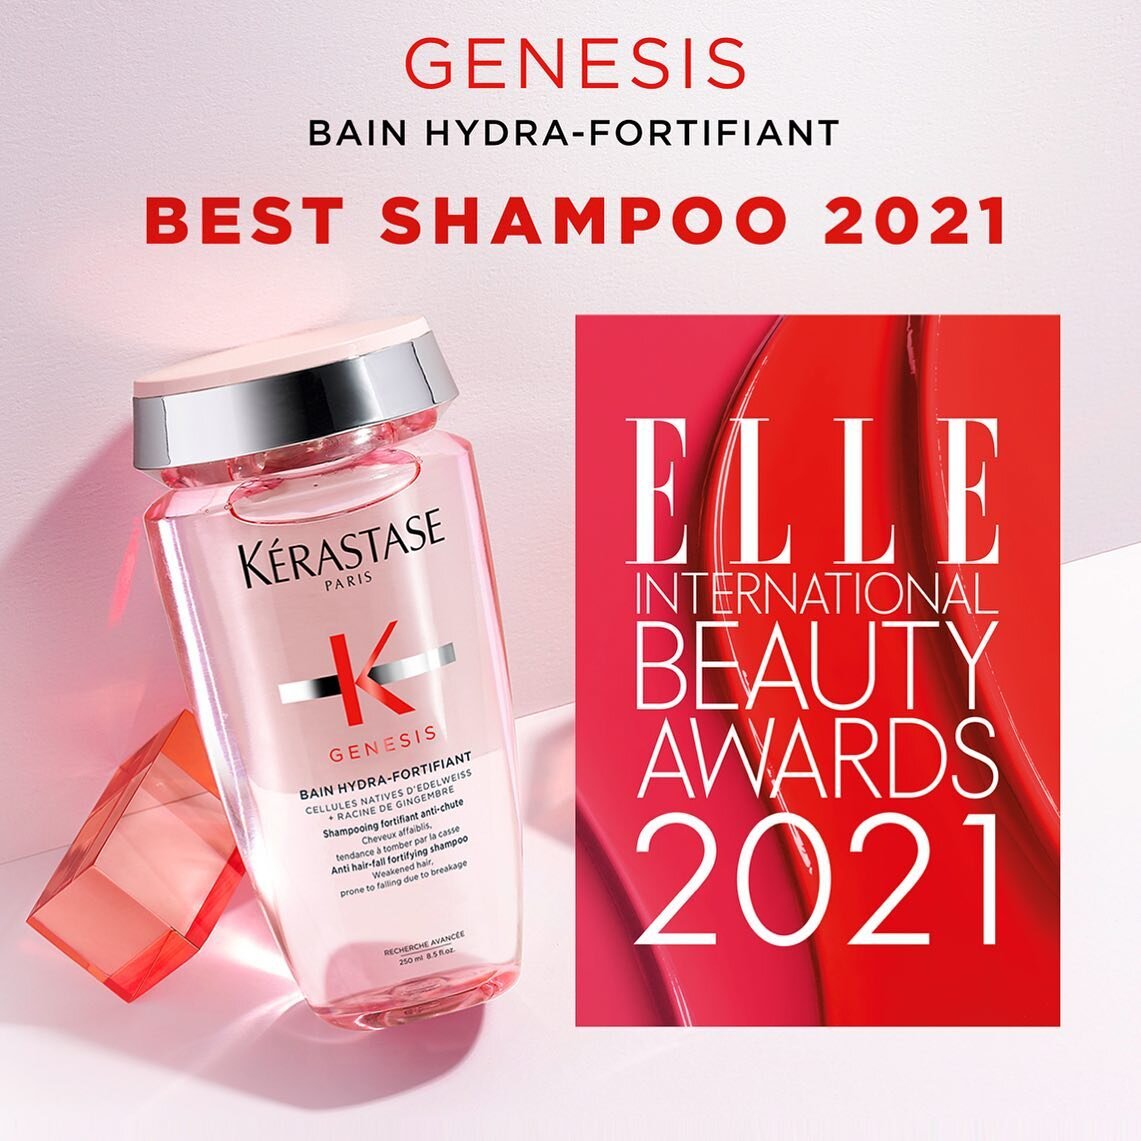 And the winner goes to...⁣
⁣
It came as no surprise that @elleusa named Bain Hydra-Fortifiant 🏆𝐁𝐞𝐬𝐭 𝐒𝐡𝐚𝐦𝐩𝐨𝐨🏆 of 2021! Our clients have been loving this shampoo, and new Genesis line. ⁣
⁣
If your scalp is oily, damaged, has split ends, or